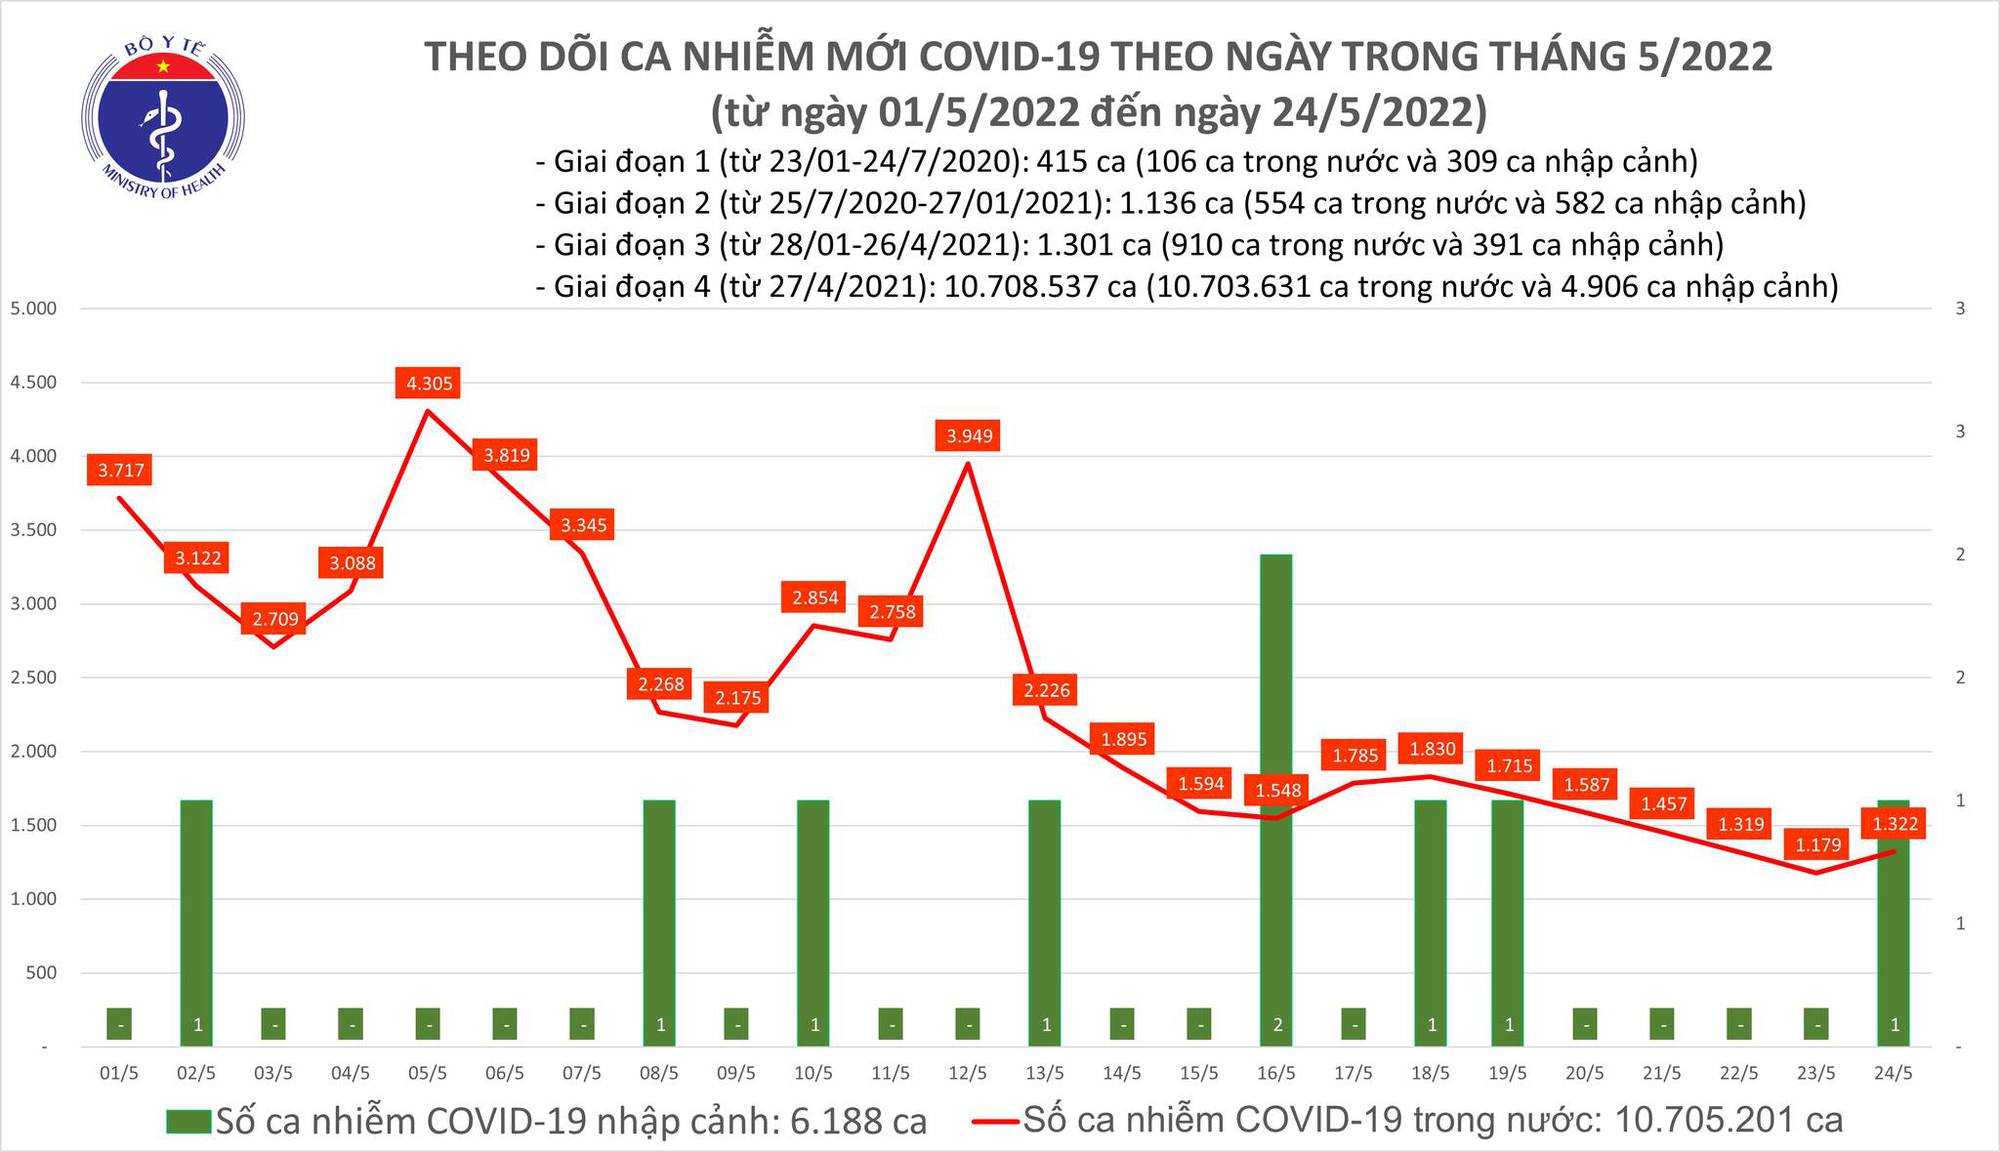 Covid-19 on May 24: More than 1,300 new cases, no deaths recorded - Photo 1.